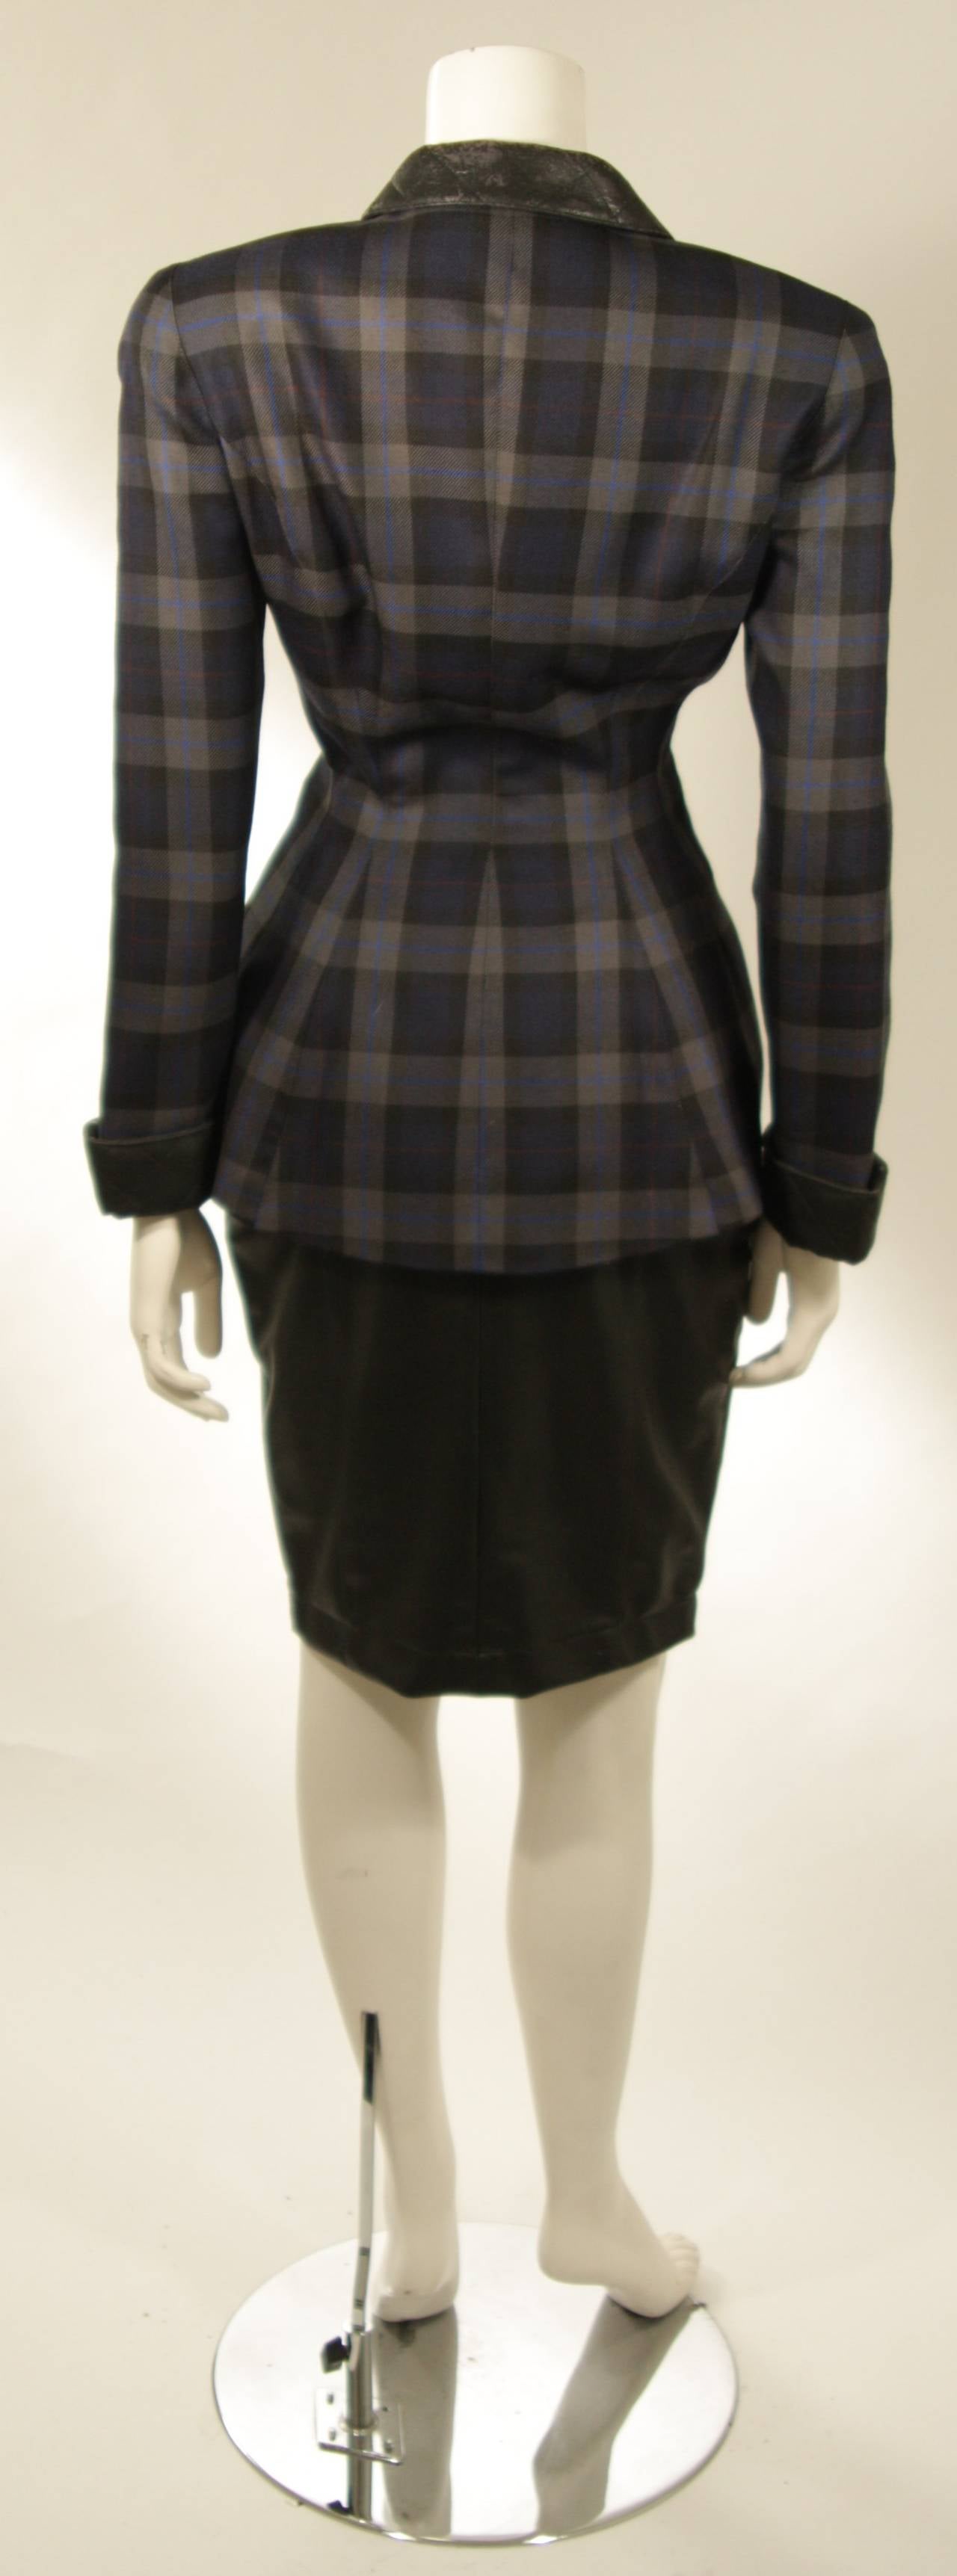 Thierry Mugler Navy and Grey Plaid Skirt Suit Size 38 In Good Condition For Sale In Los Angeles, CA